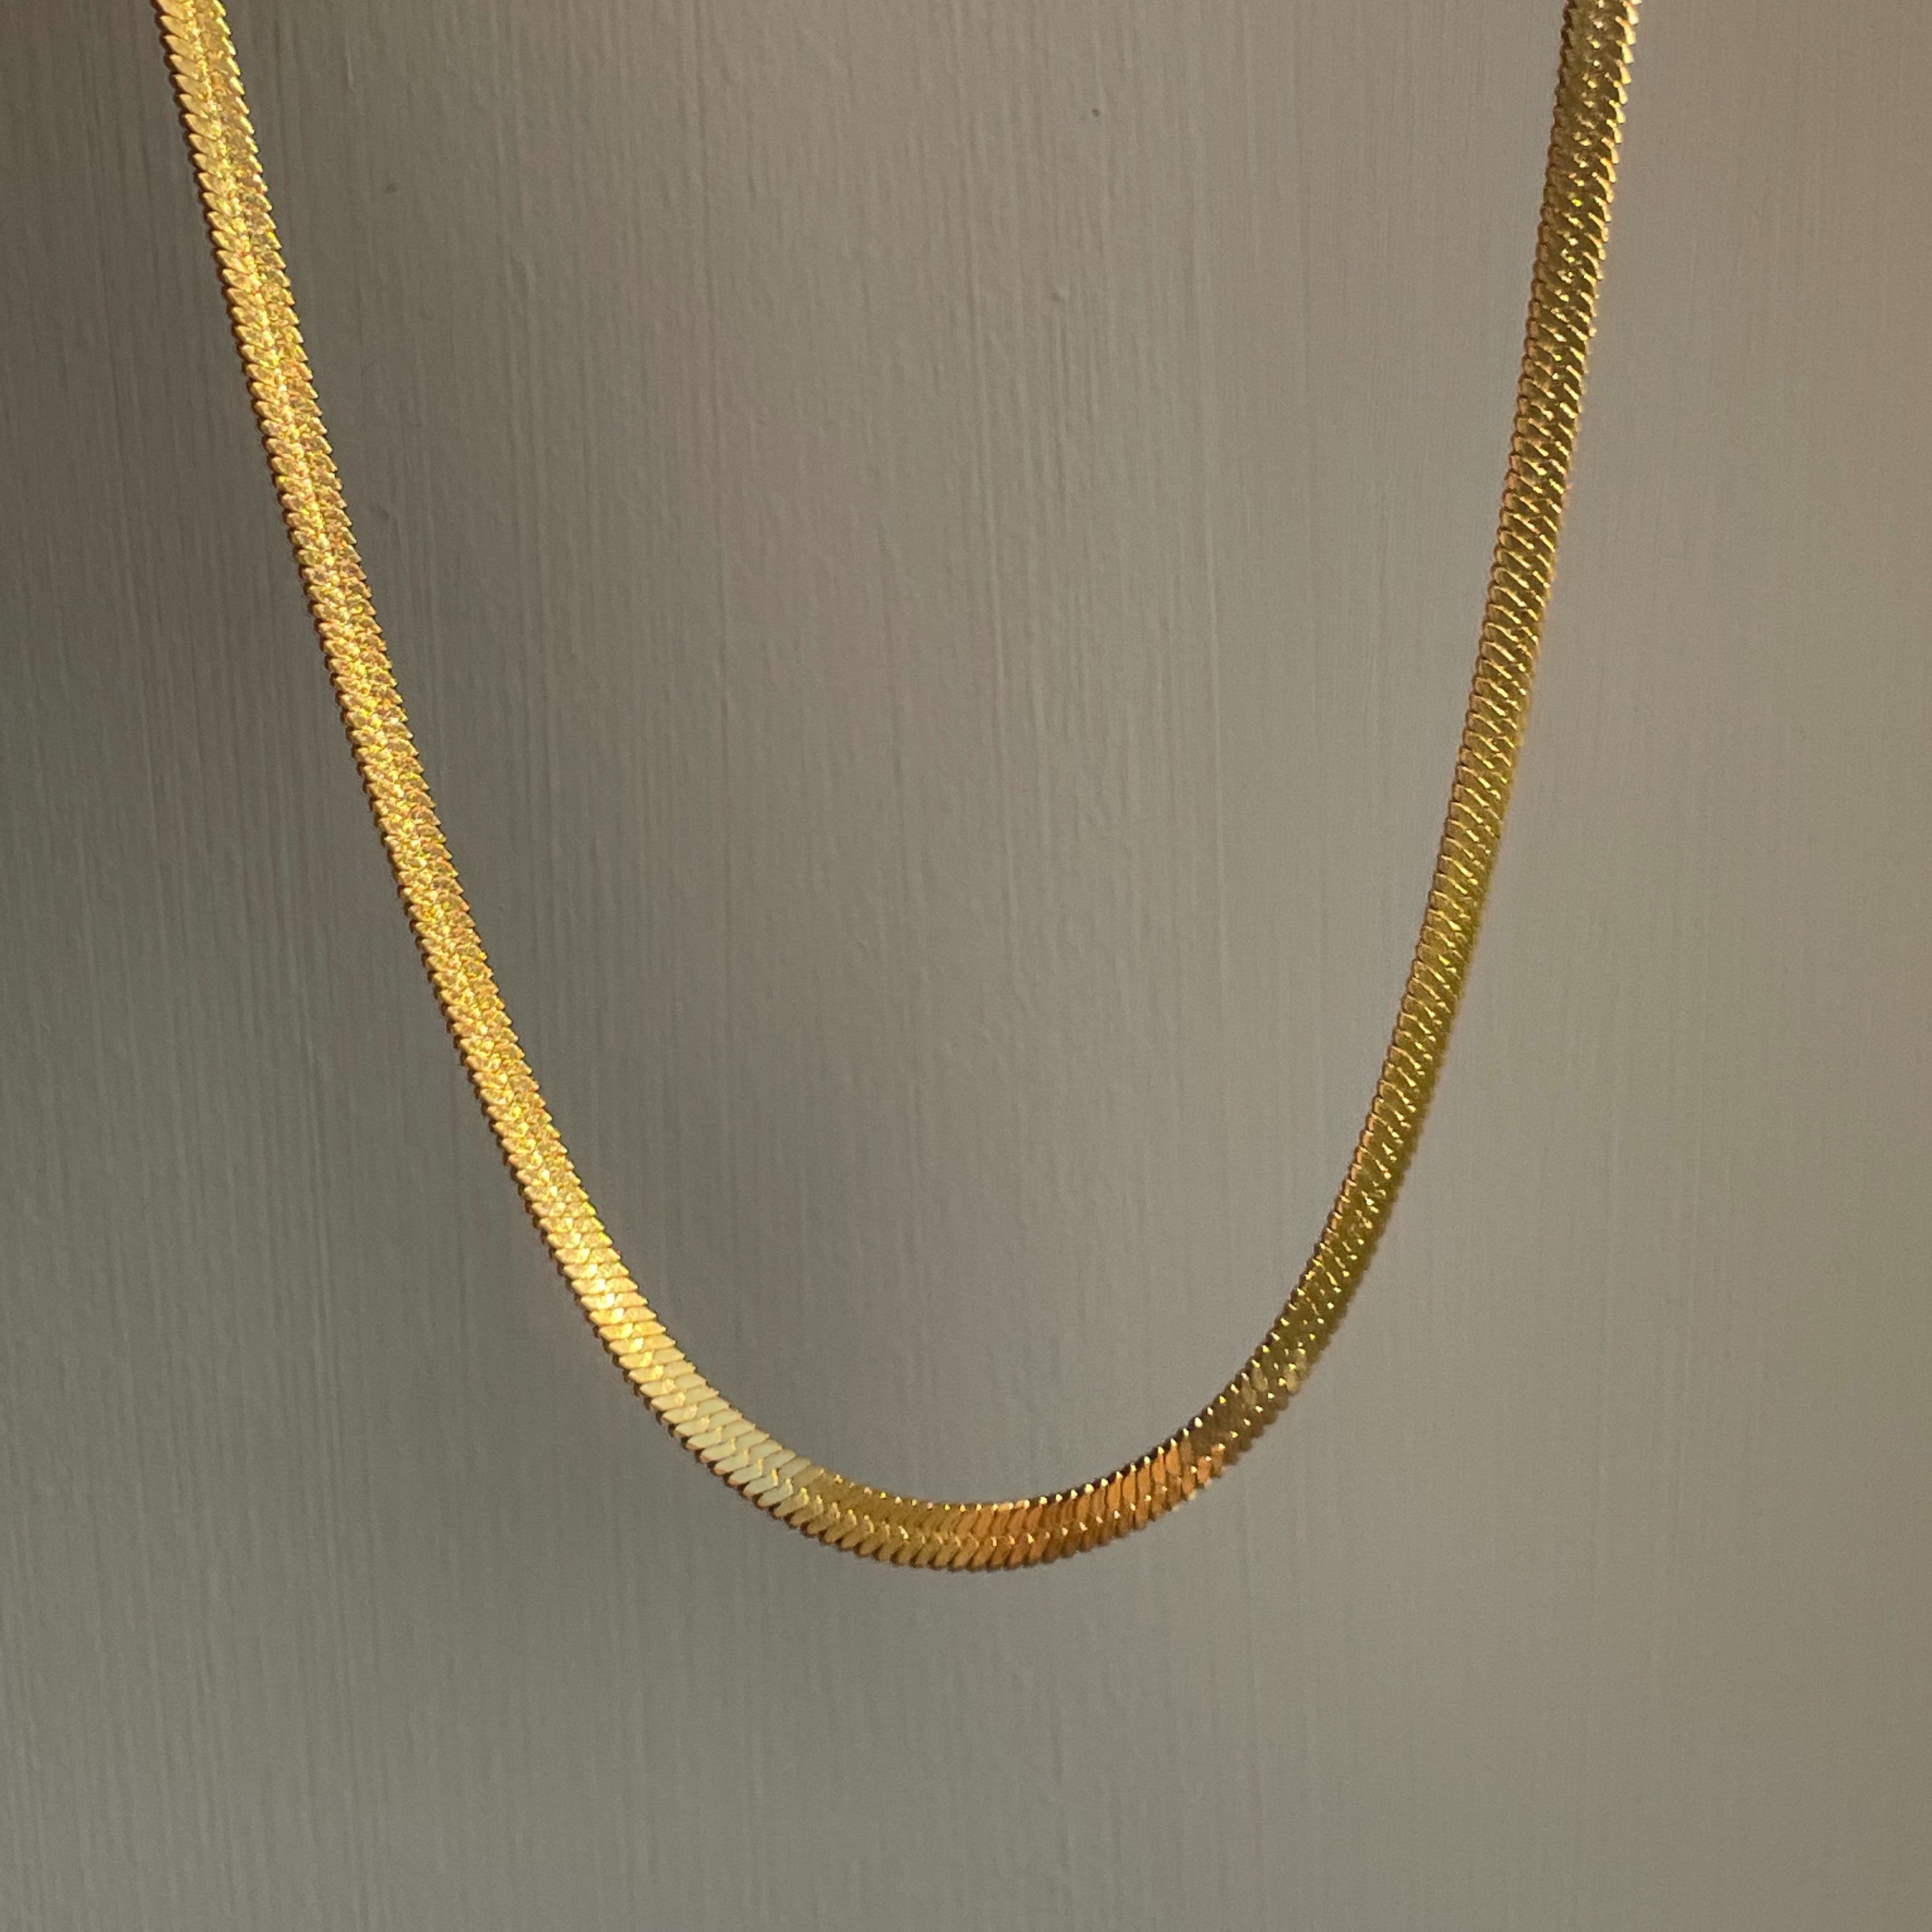 Shiny gold necklace with snake chain pattern